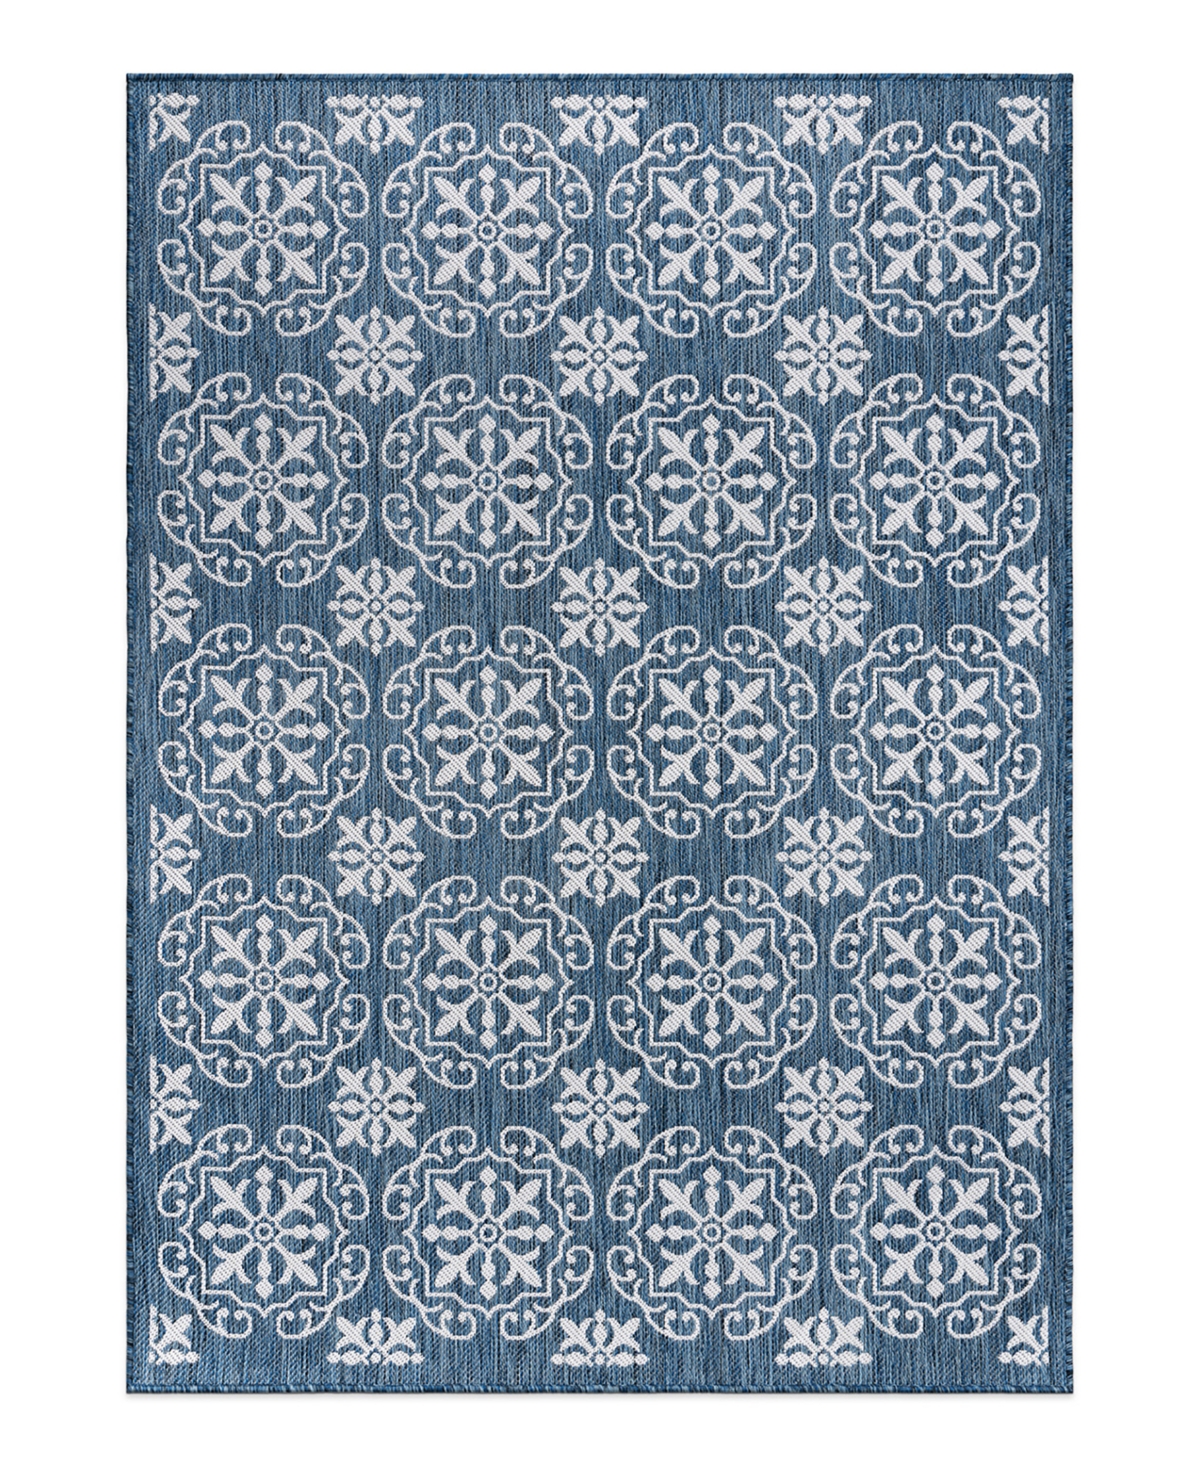 Main Street Rugs Bays Outdoor 119 7'10" X 10' Area Rug In Blue